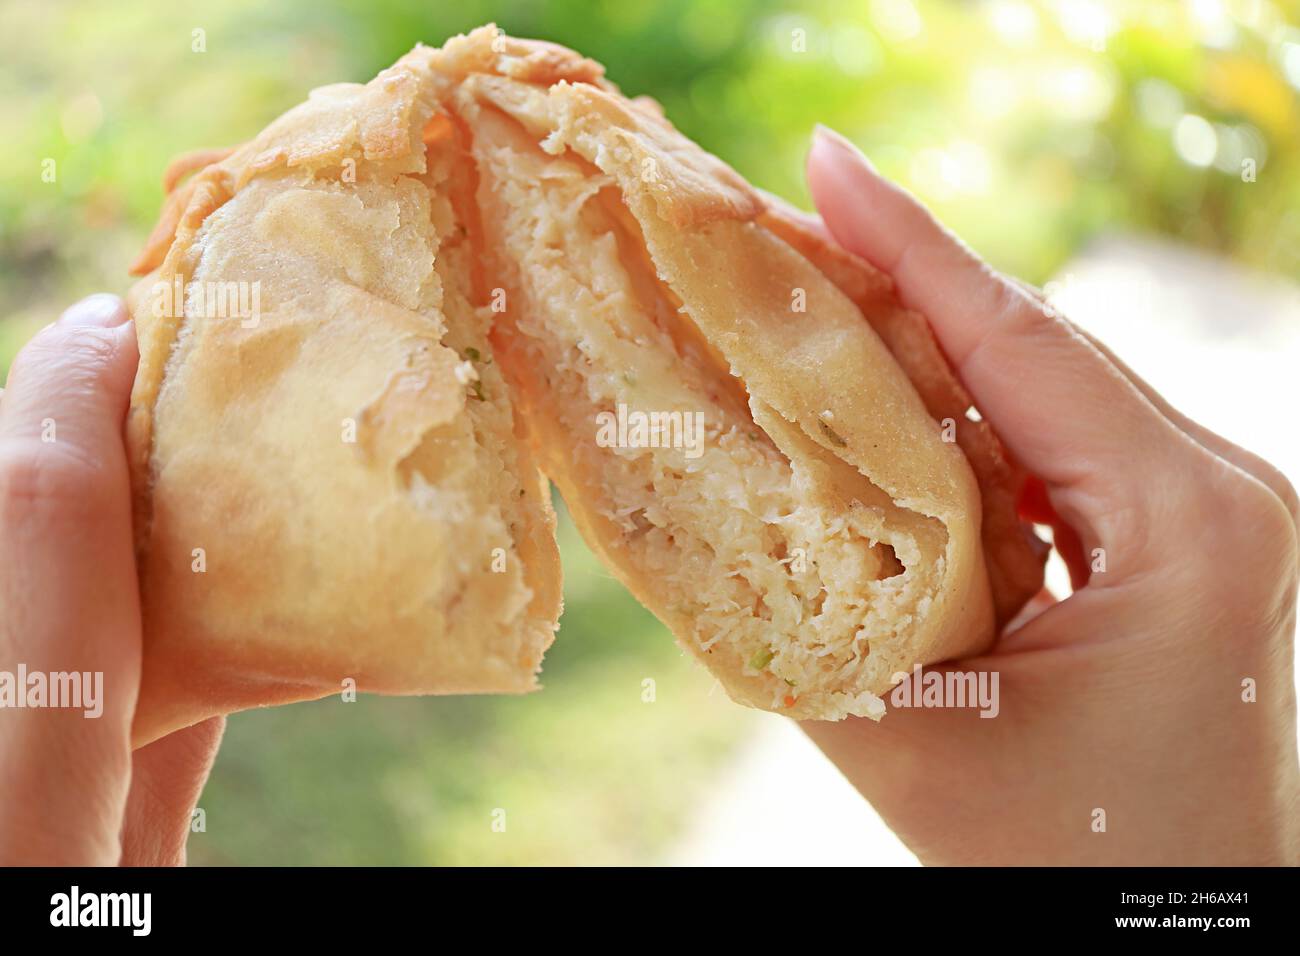 Mouthwatering Empanadas de jaiba or crab meat filled Chilean puff pastry in woman's hands Stock Photo